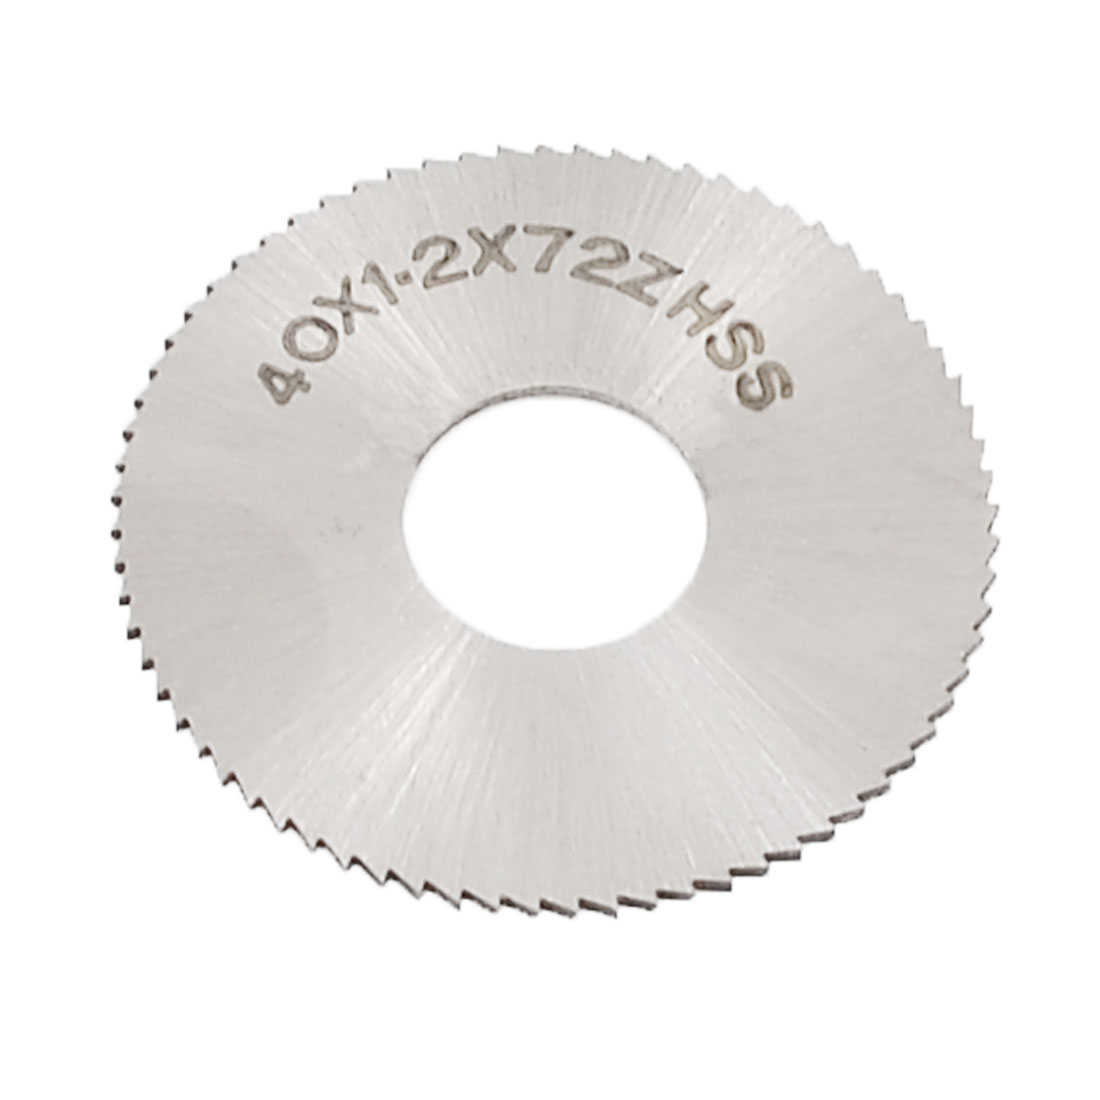 Unique Bargains 40mm Cutting Dia 1.2mm Thickness 72T Saw Milling Cutter